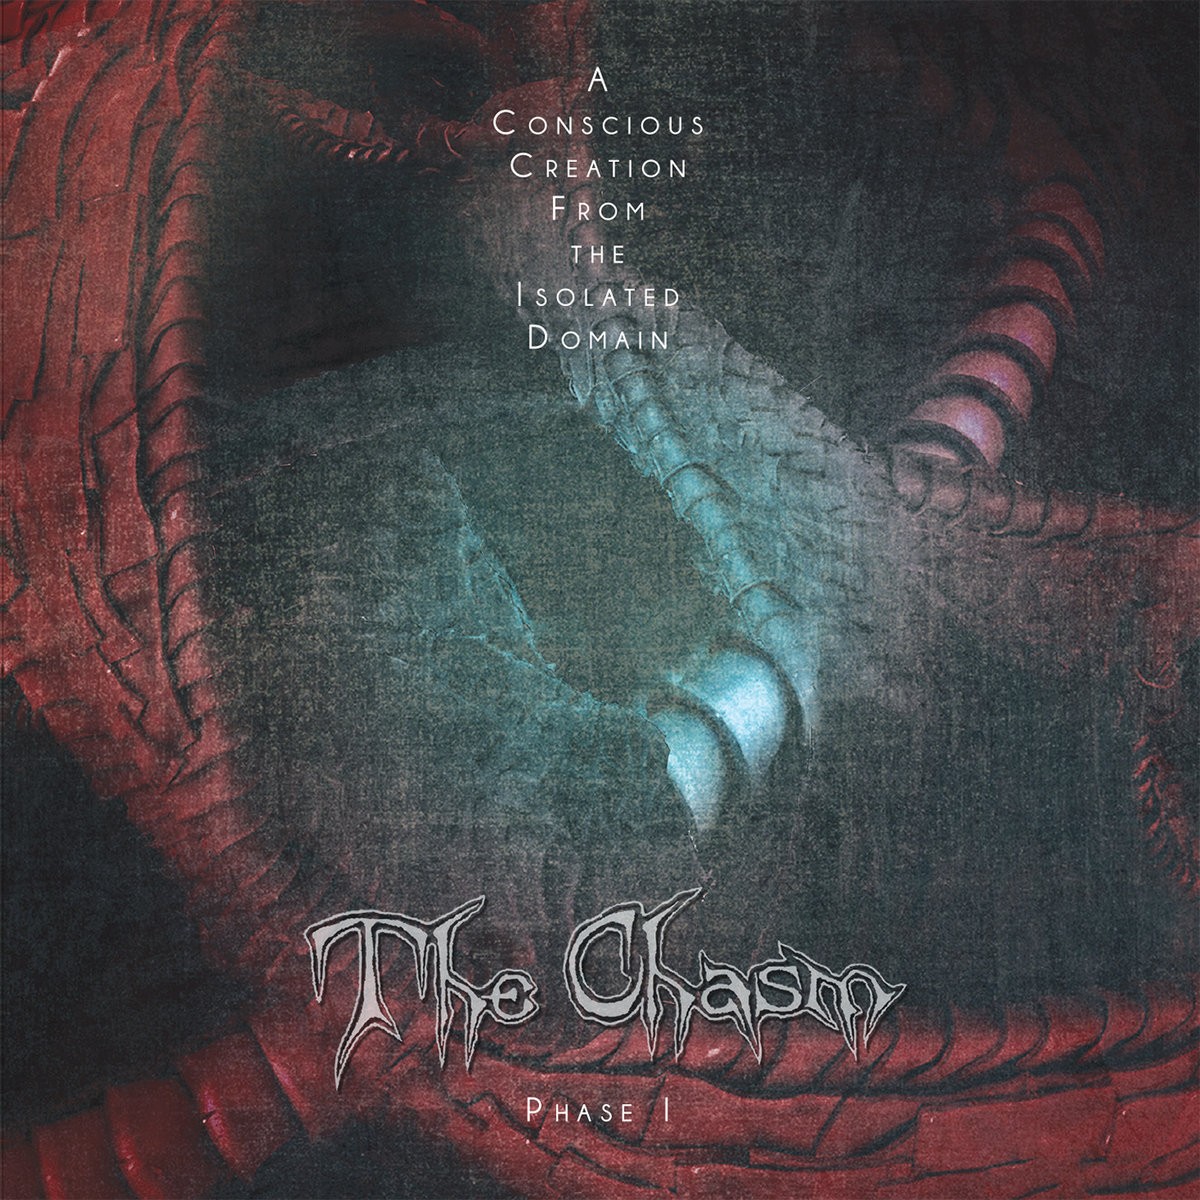 Chasm, The - A Conscious Creation From the Isolated Domain: Phase I (2017) Cover